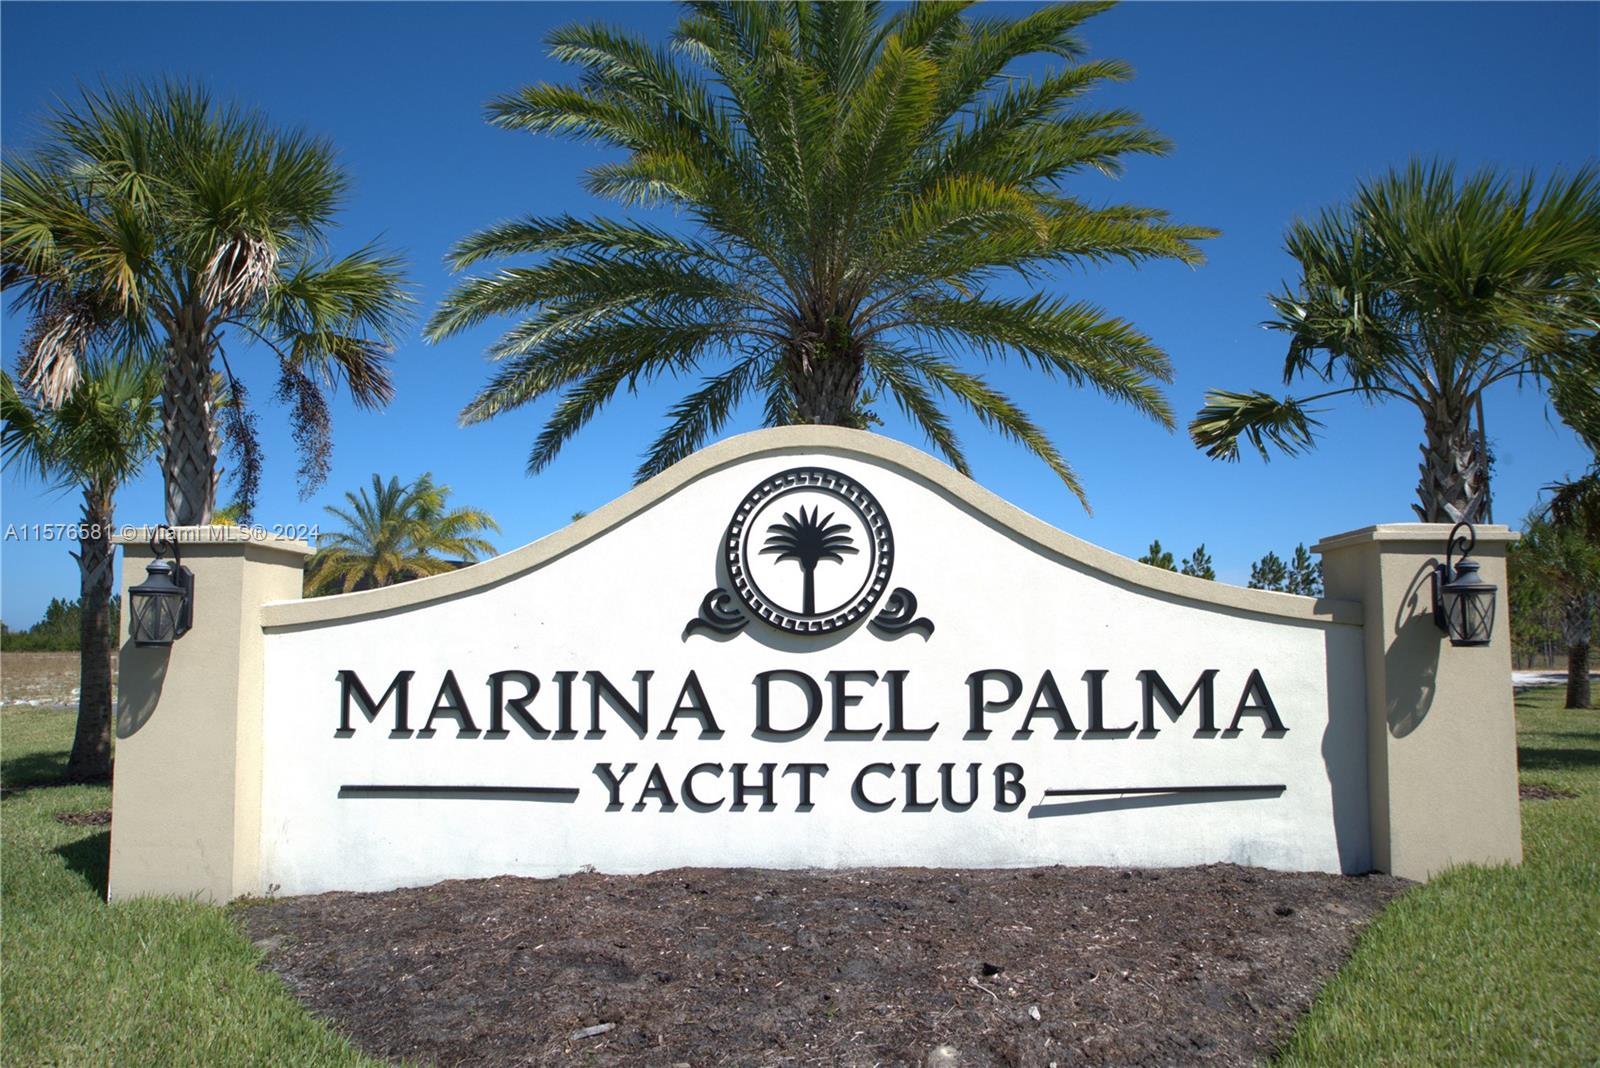 a view of a sign under a palm tree